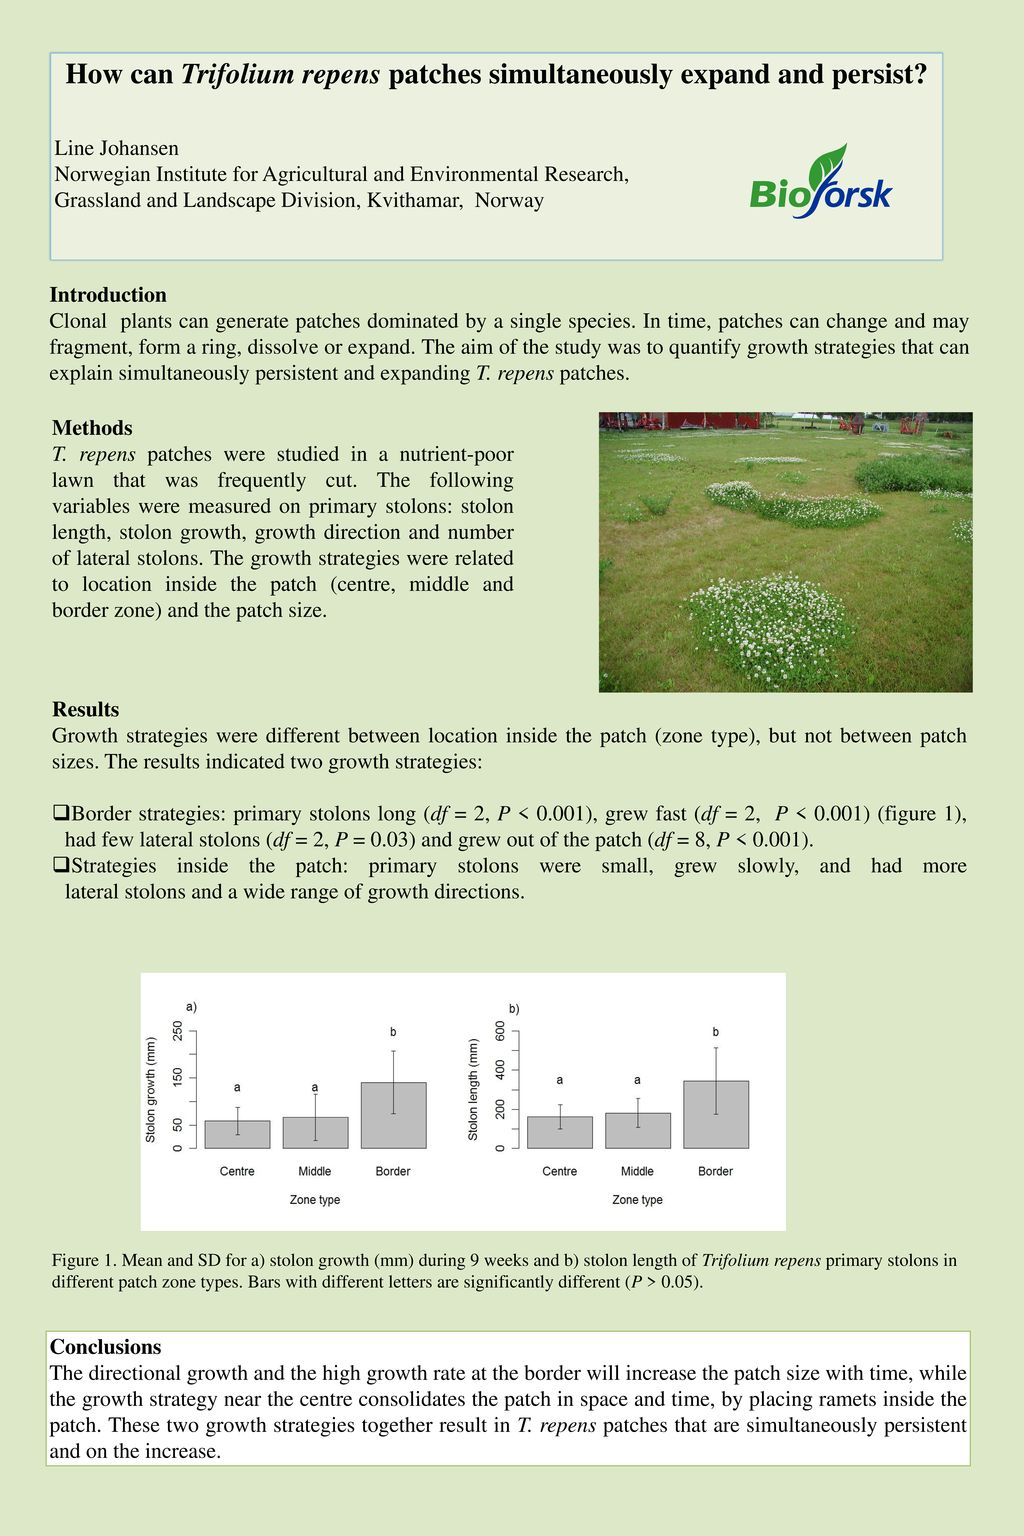 How can Trifolium repens patches simultaneously expand and persist